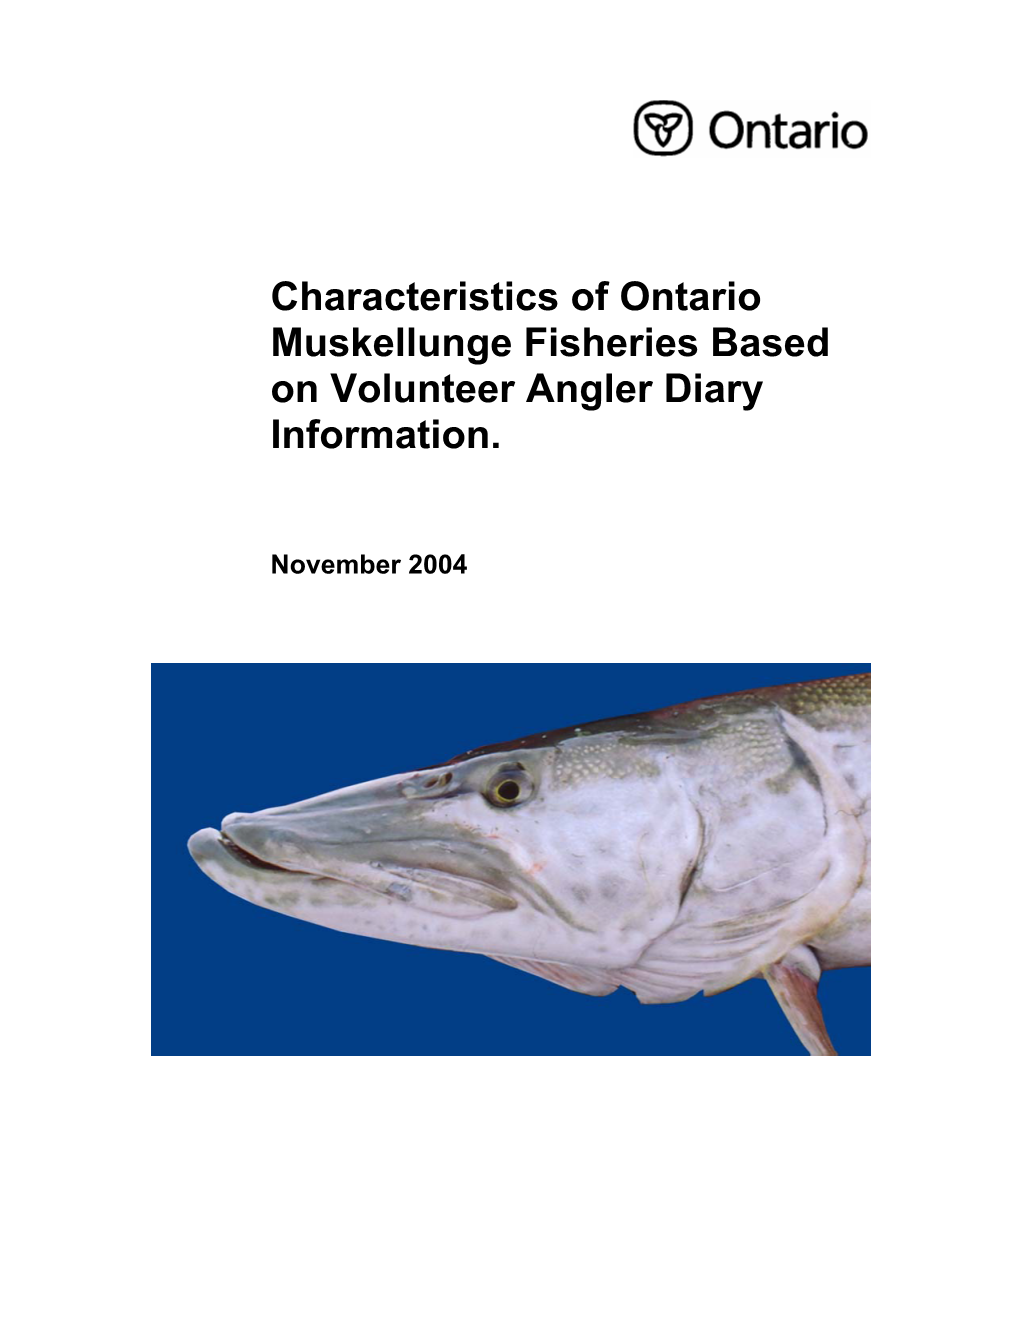 Characteristics of Ontario Muskellunge Fisheries Based on Volunteer Angler Diary Information